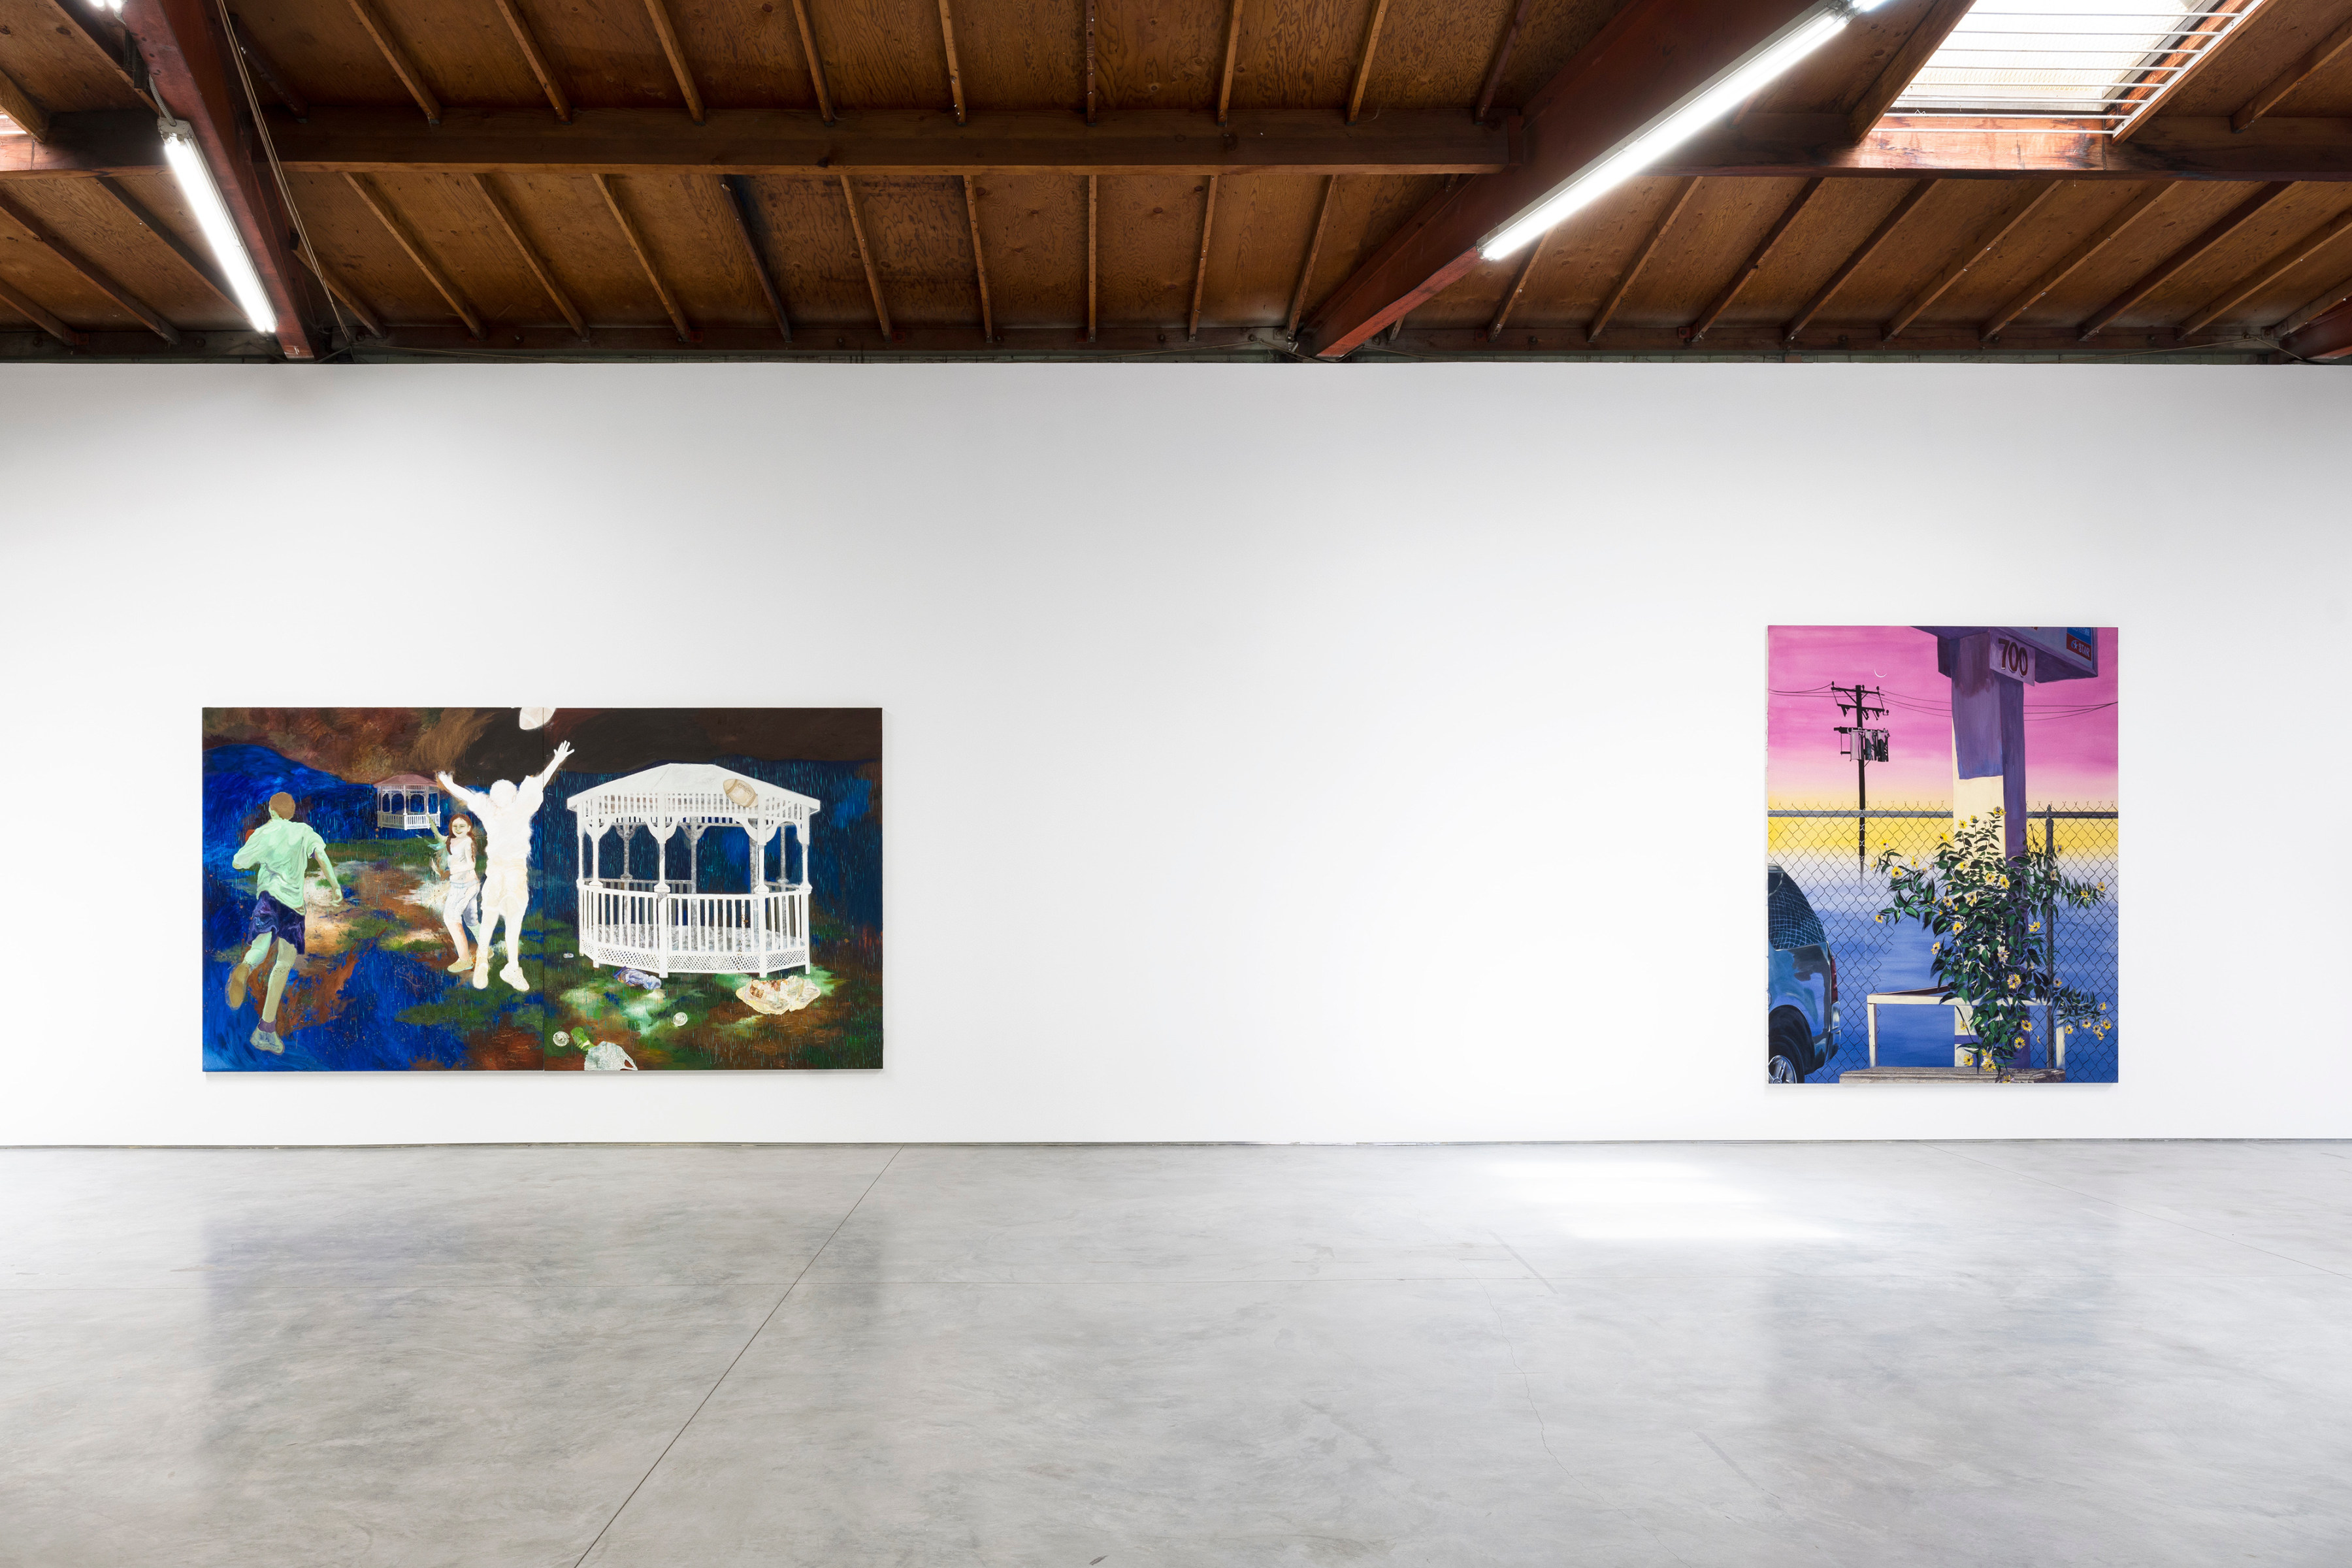 Installation view of "What Will You Give?" by Veronica Fernandez and Tidawhitney Lek at Sidecar Gallery.